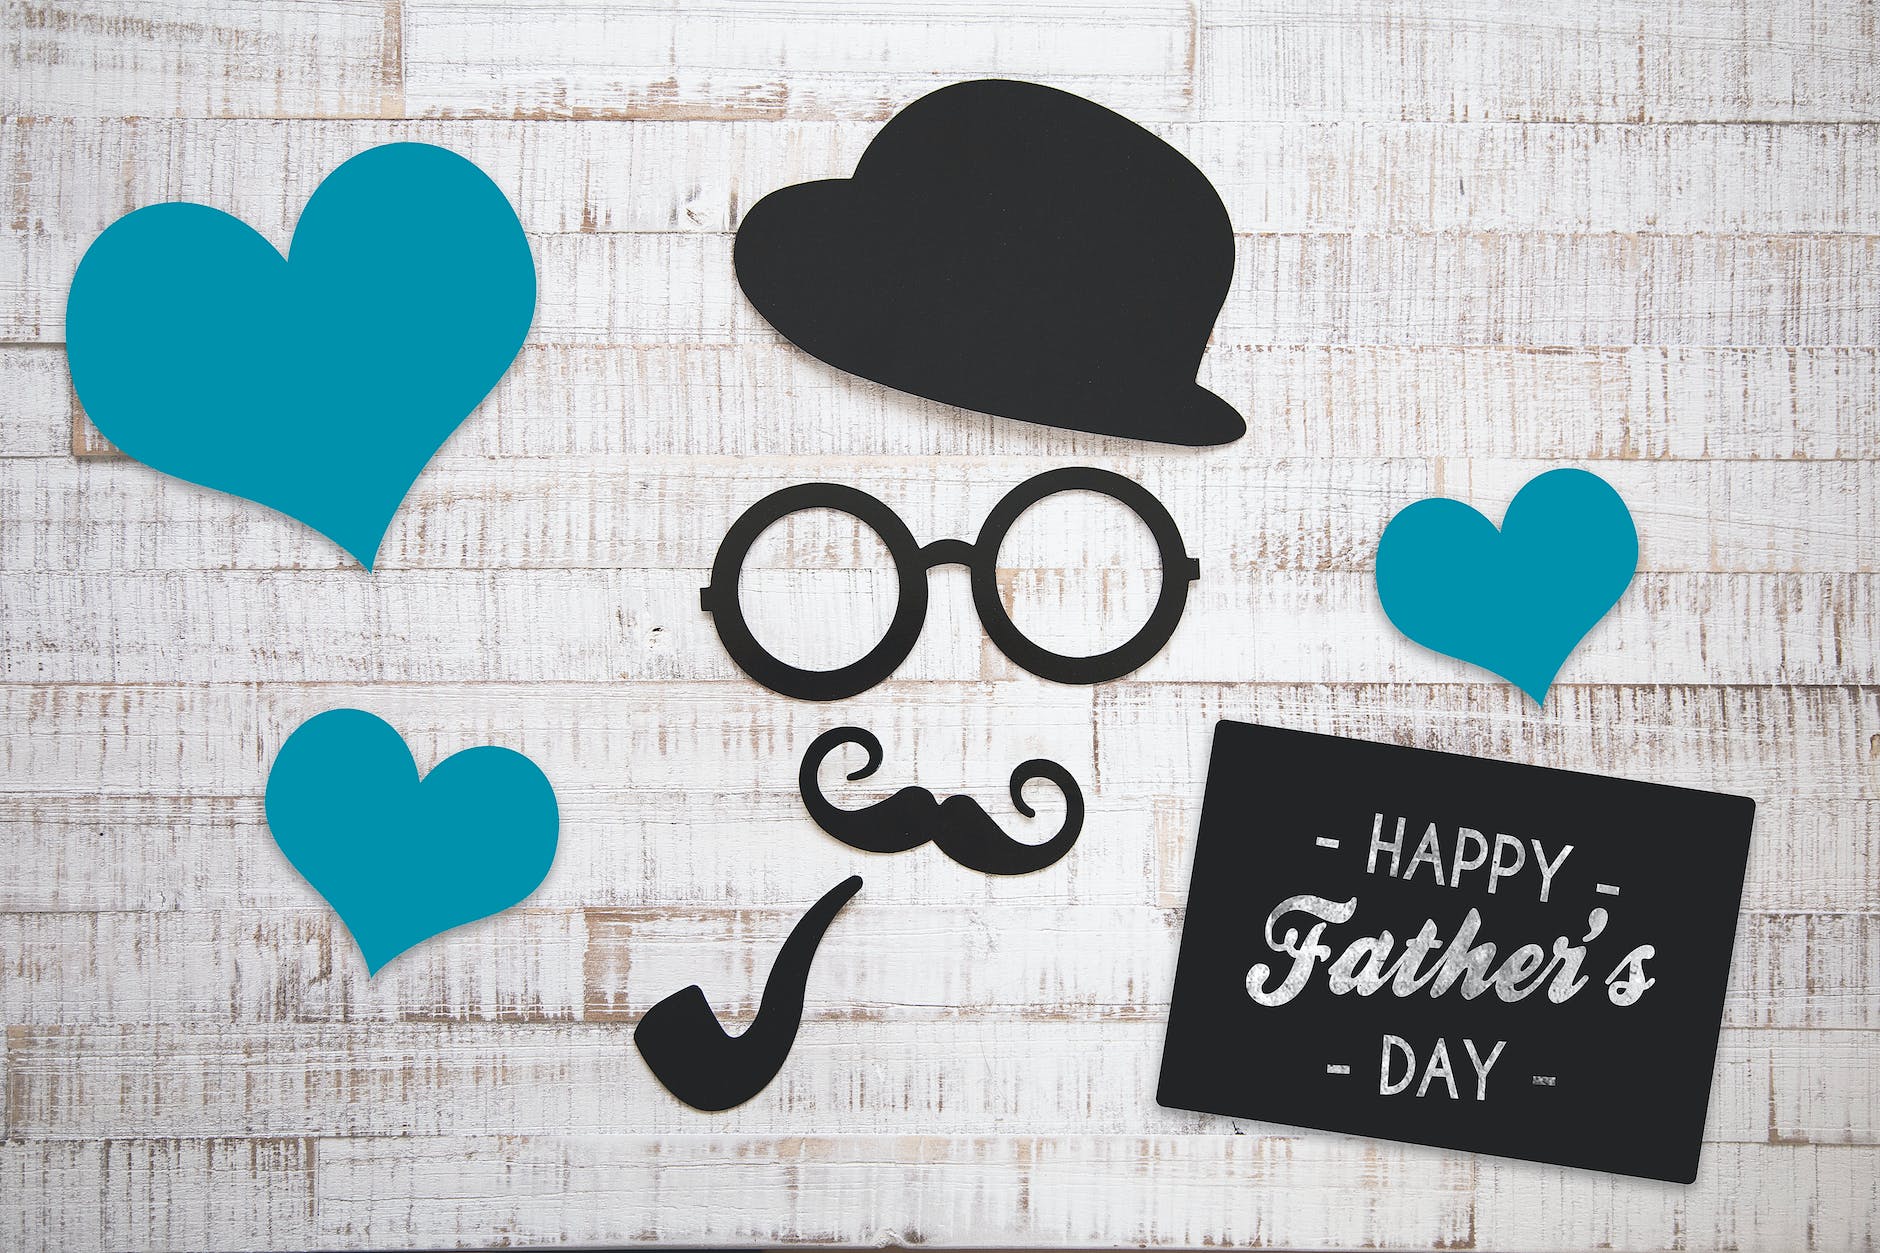 photo of happy father's day greetings Photo by Cristian Dina on Pexels.com